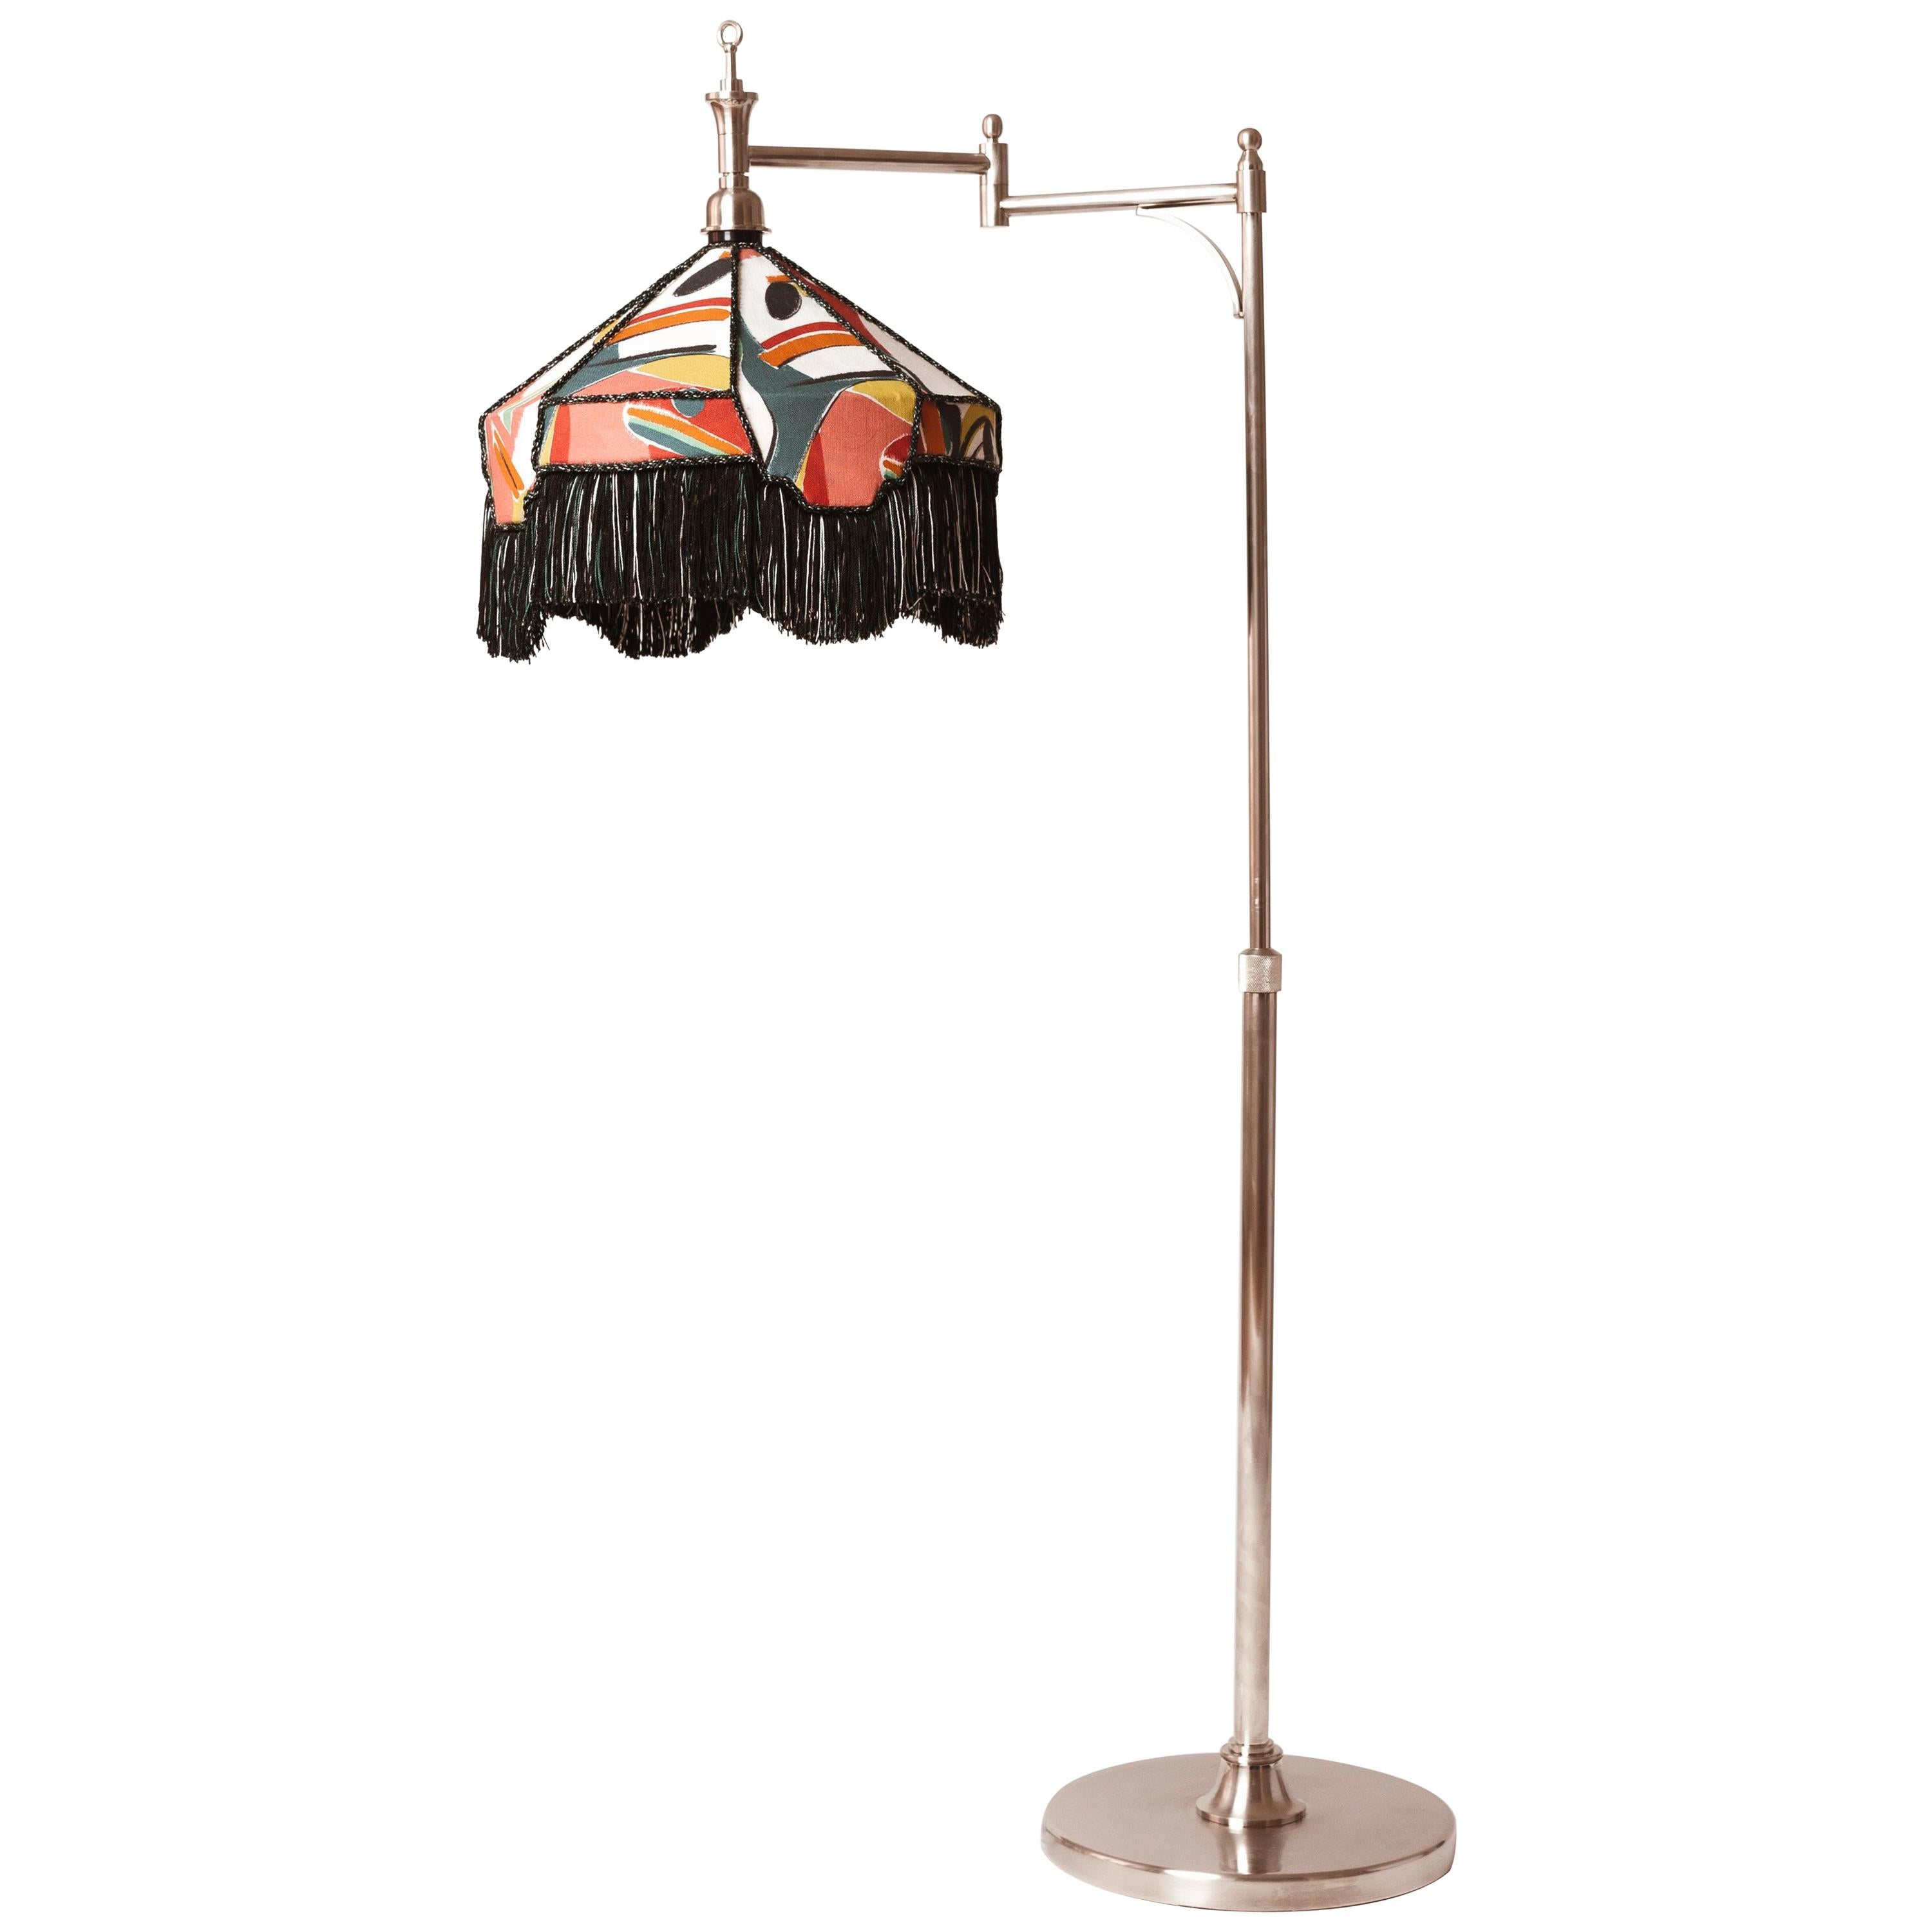 Deco Style Lamp in Brass, Finish in Polished Nickel, Lamp Shade with Embroidery